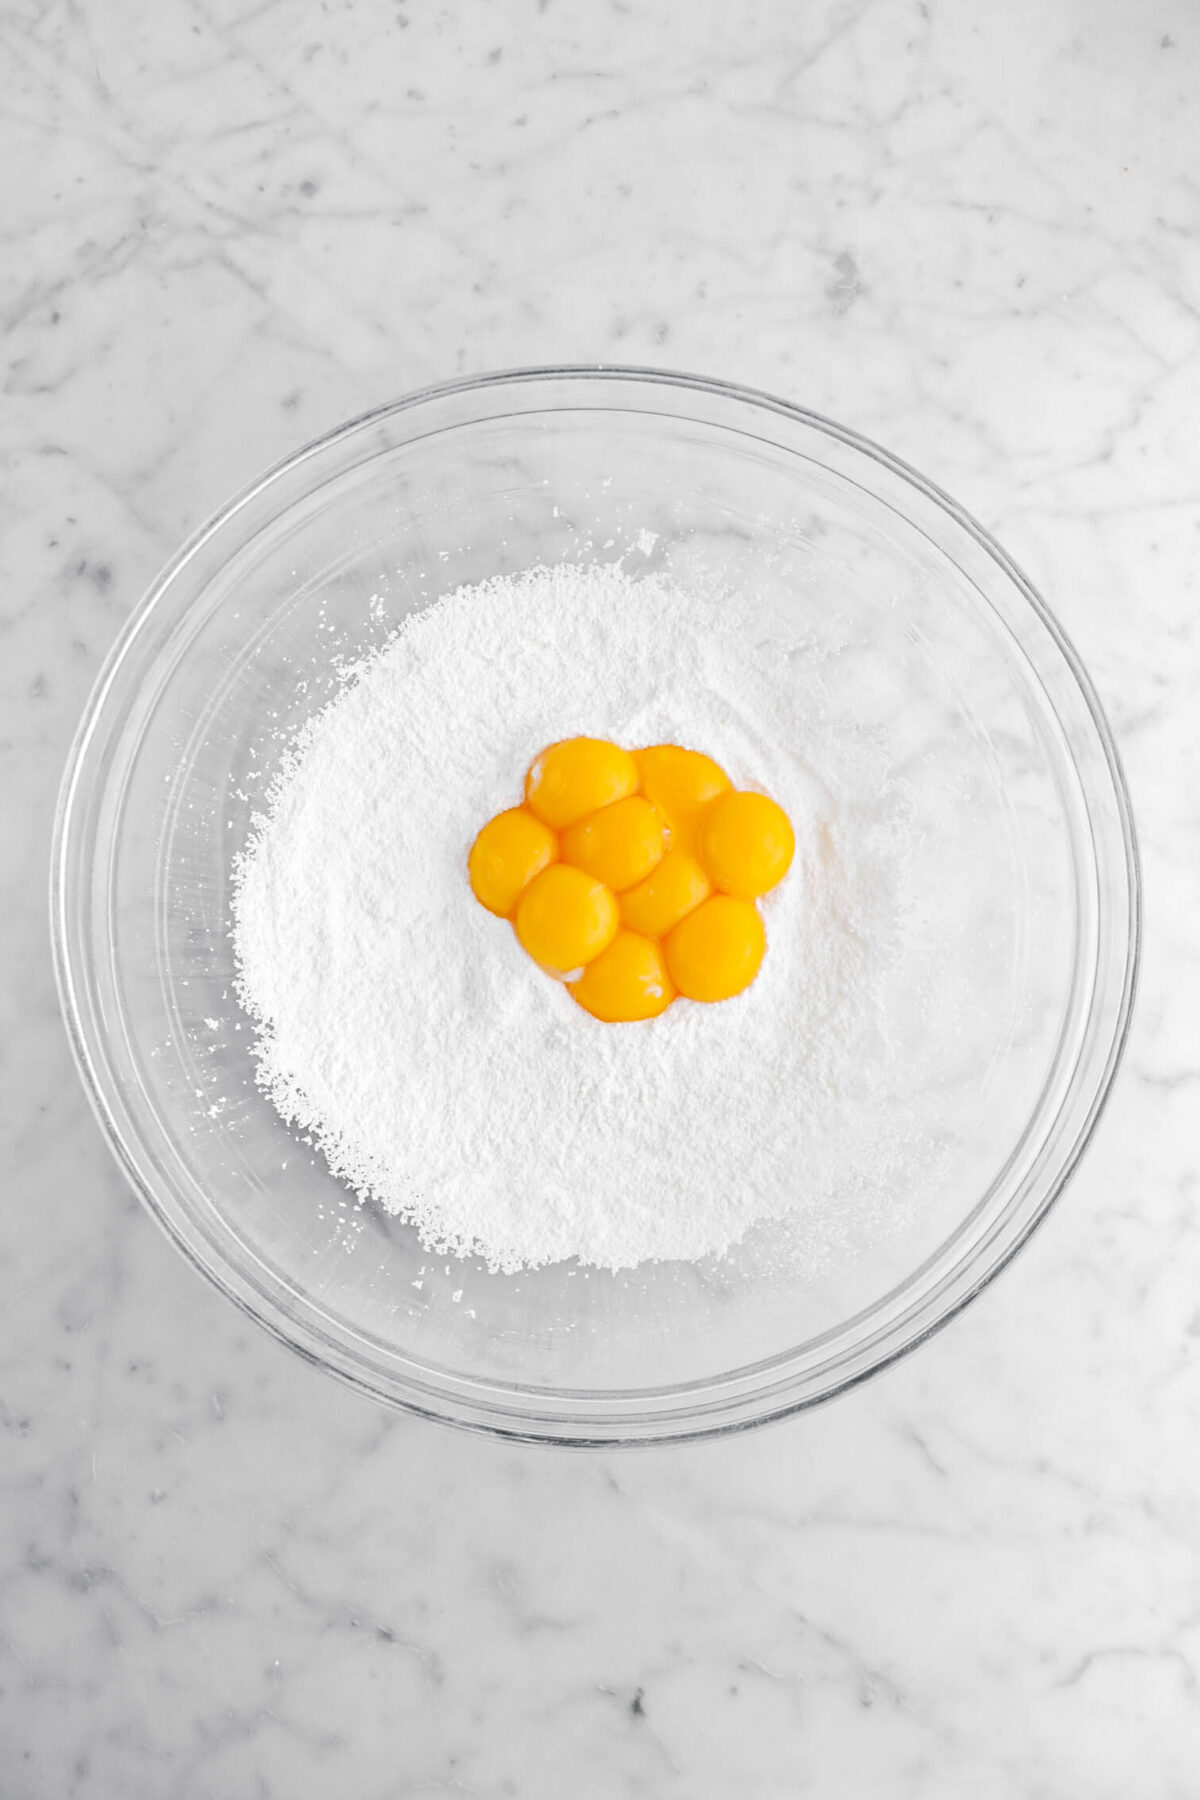 egg yolks added to corn starch and sugar mixture.